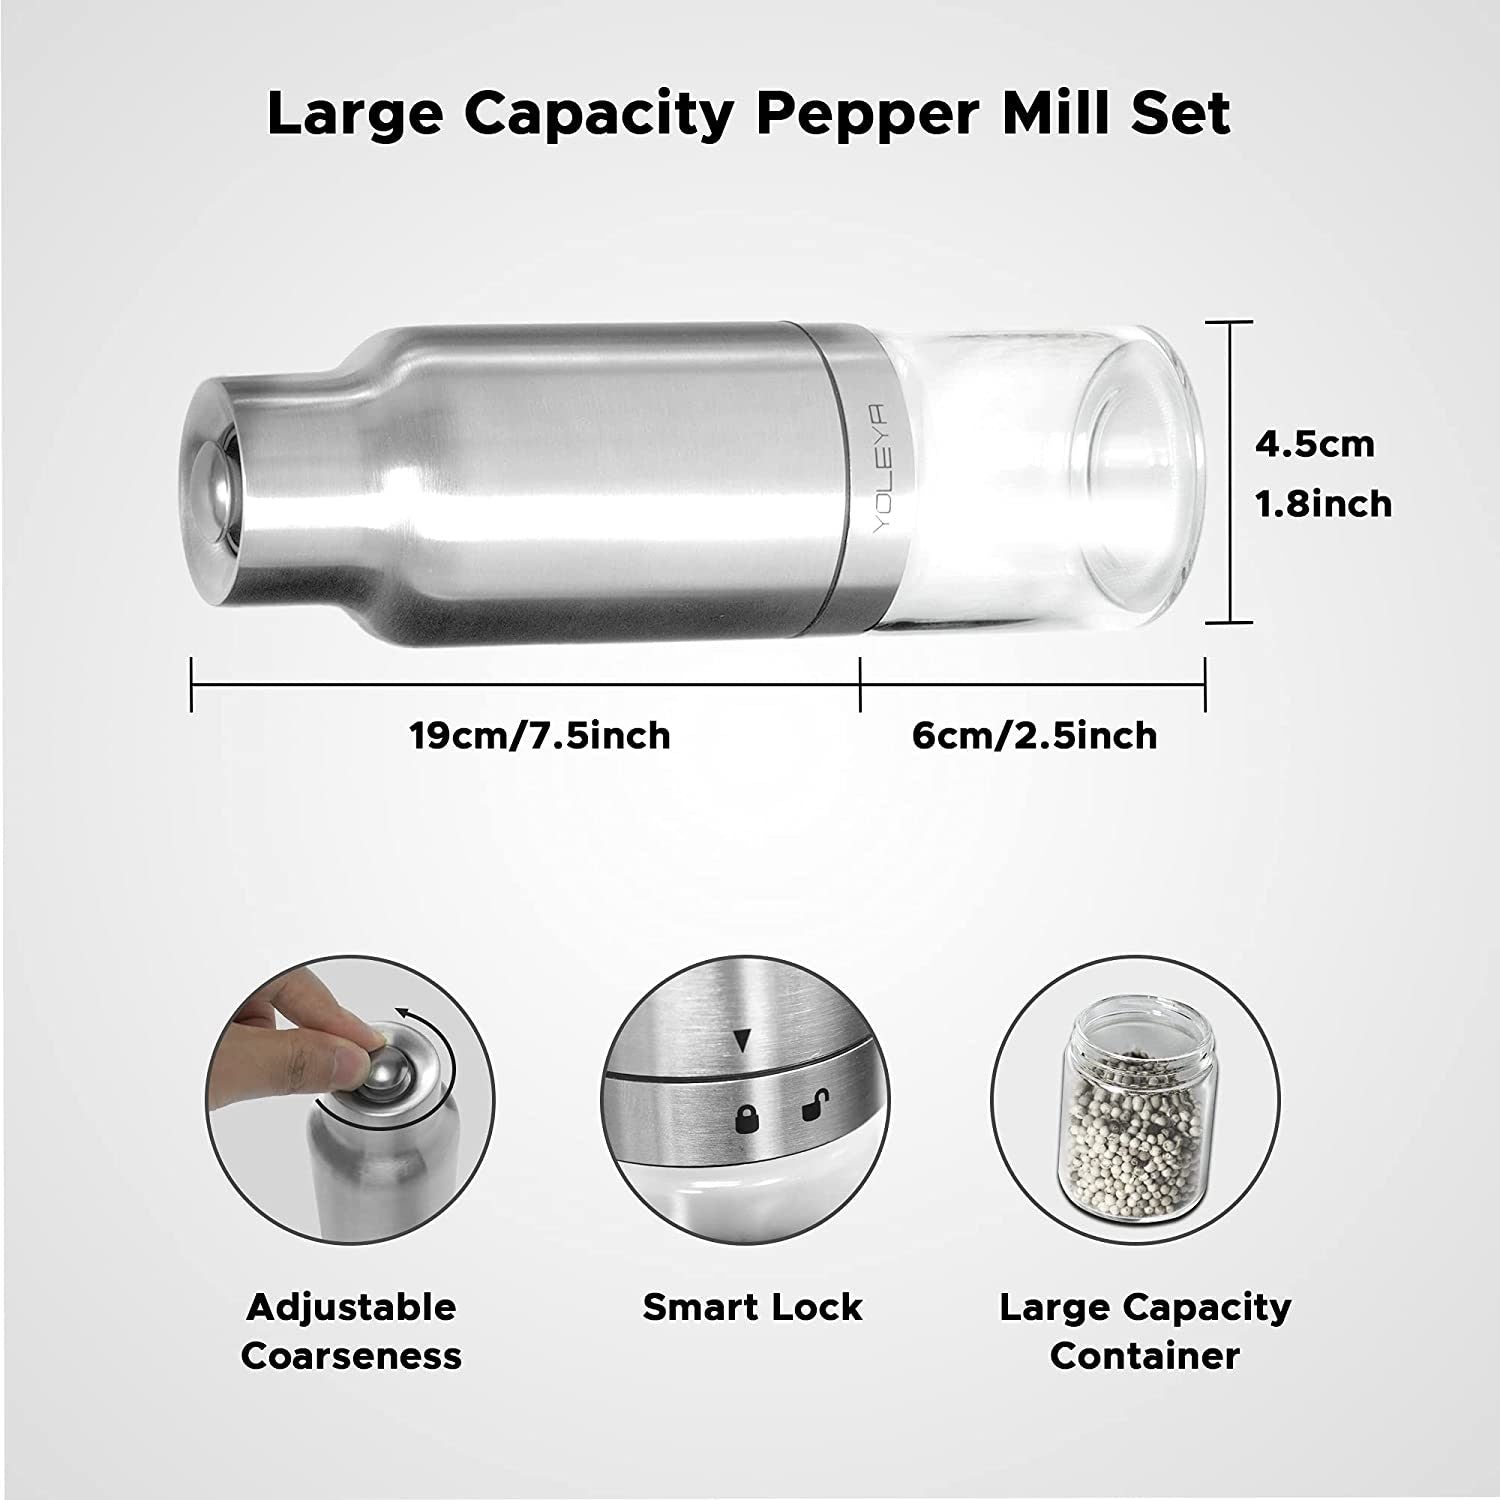 Gravity Electric Salt and Pepper Grinder Set - Automatic Pepper or Salt Mill Shaker, Spice Grinder Battery-Operated with Adjustable Coarseness,One Hand Operated,Utility Brush,Premium Stainless Steel.